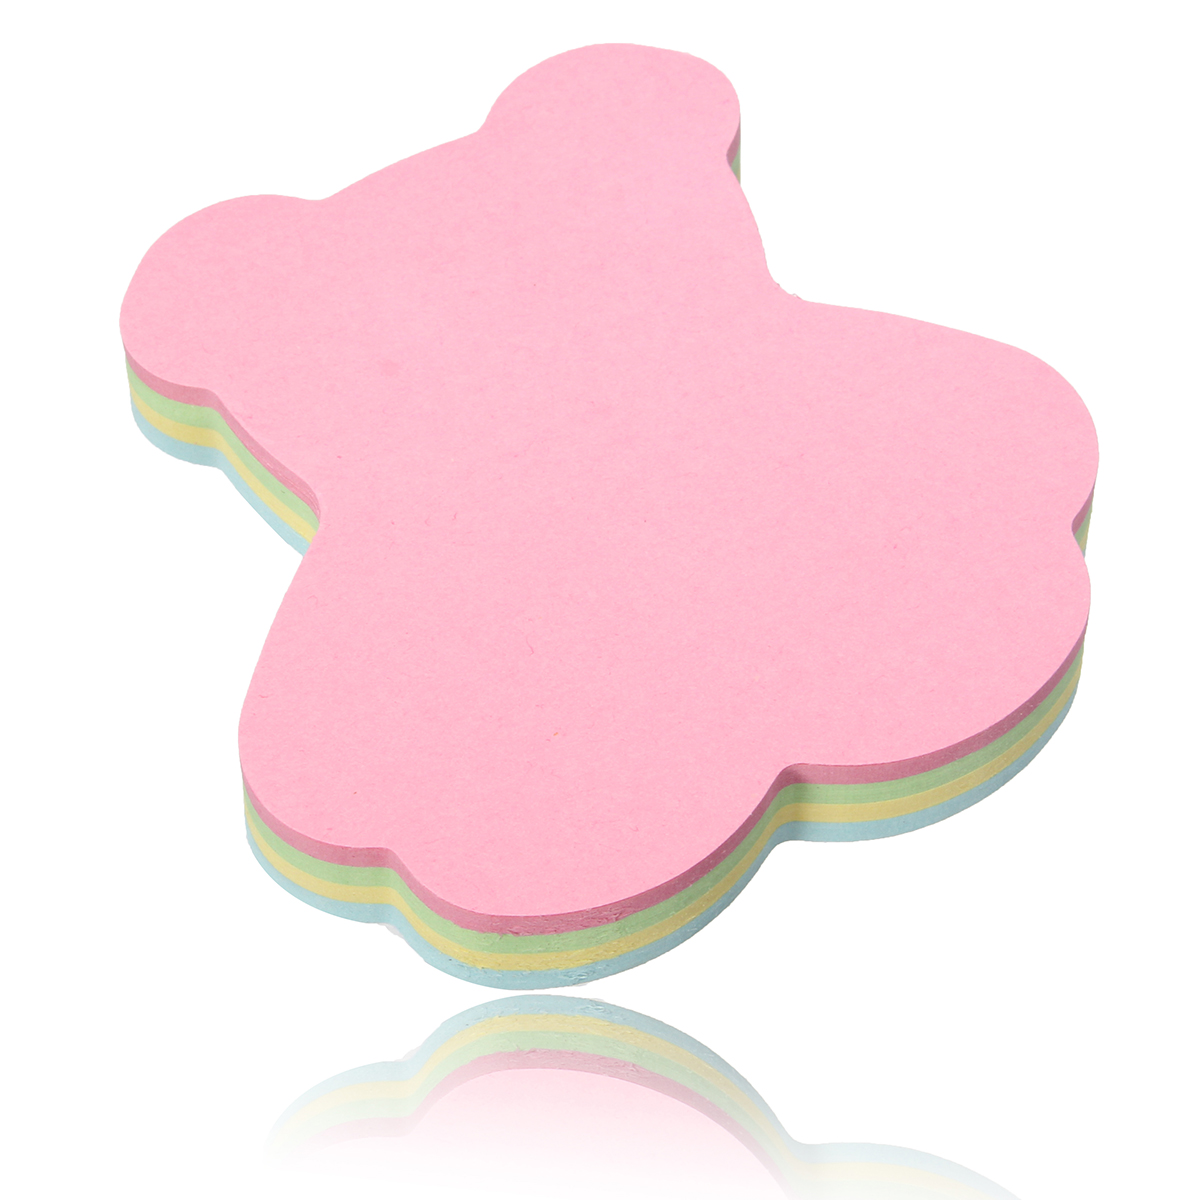 1-Pcs-Sticky-Note-Color-Post-Note-Paper-Sticker-Cute-Candy-Color-Sticky-Notes-Stationery-Papers-Book-1462369-8